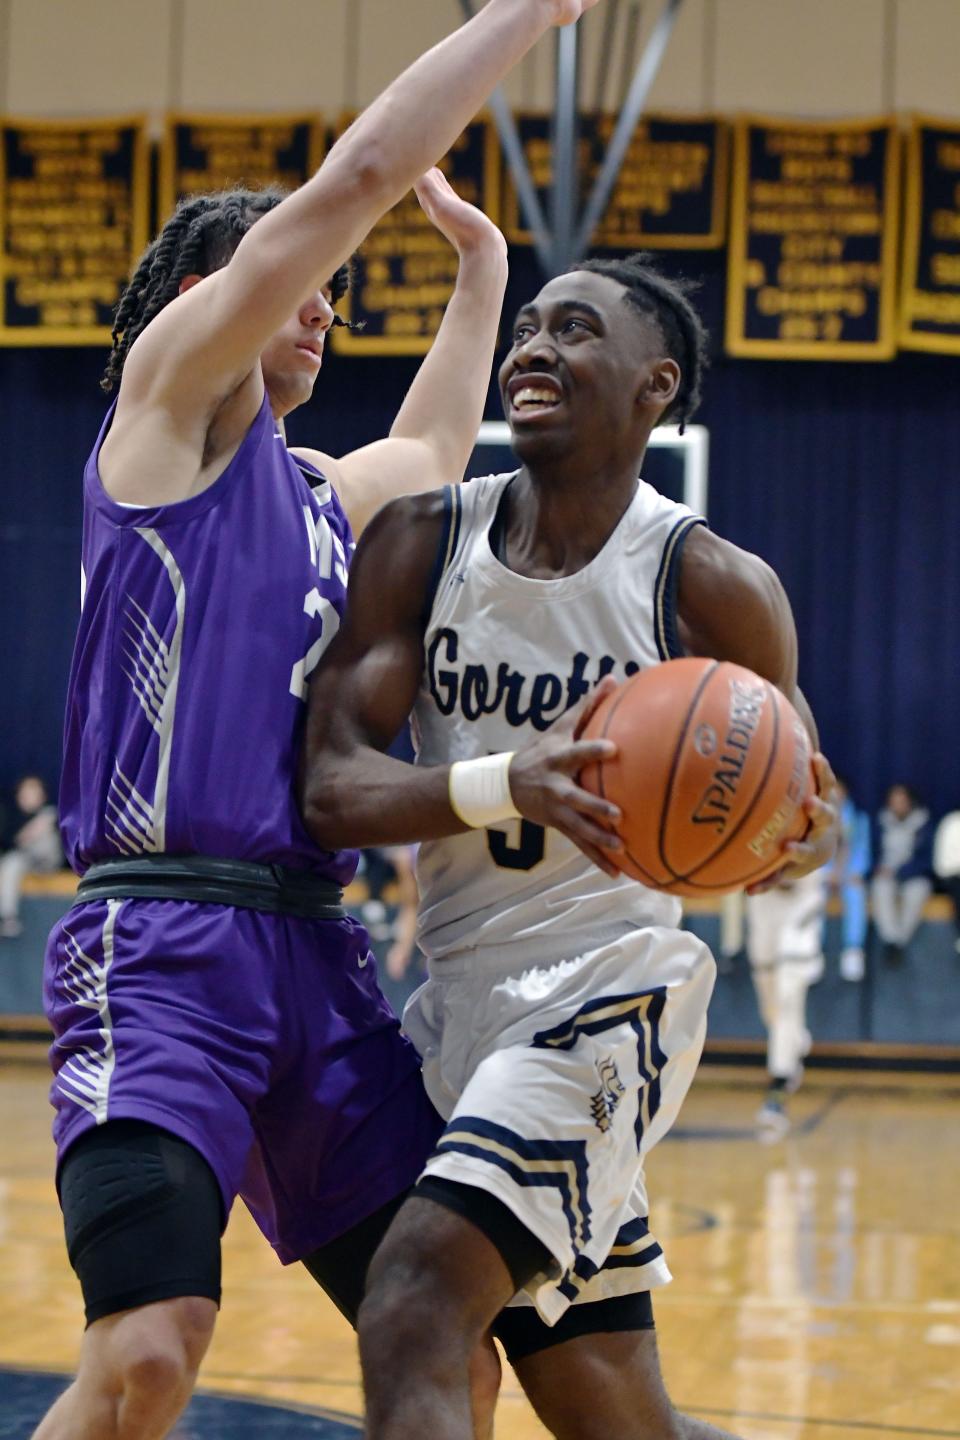 St. Maria Goretti's Dionte Alexander goes to the basket against Mount St. Joseph during the Gaels' 54-52 victory in January.